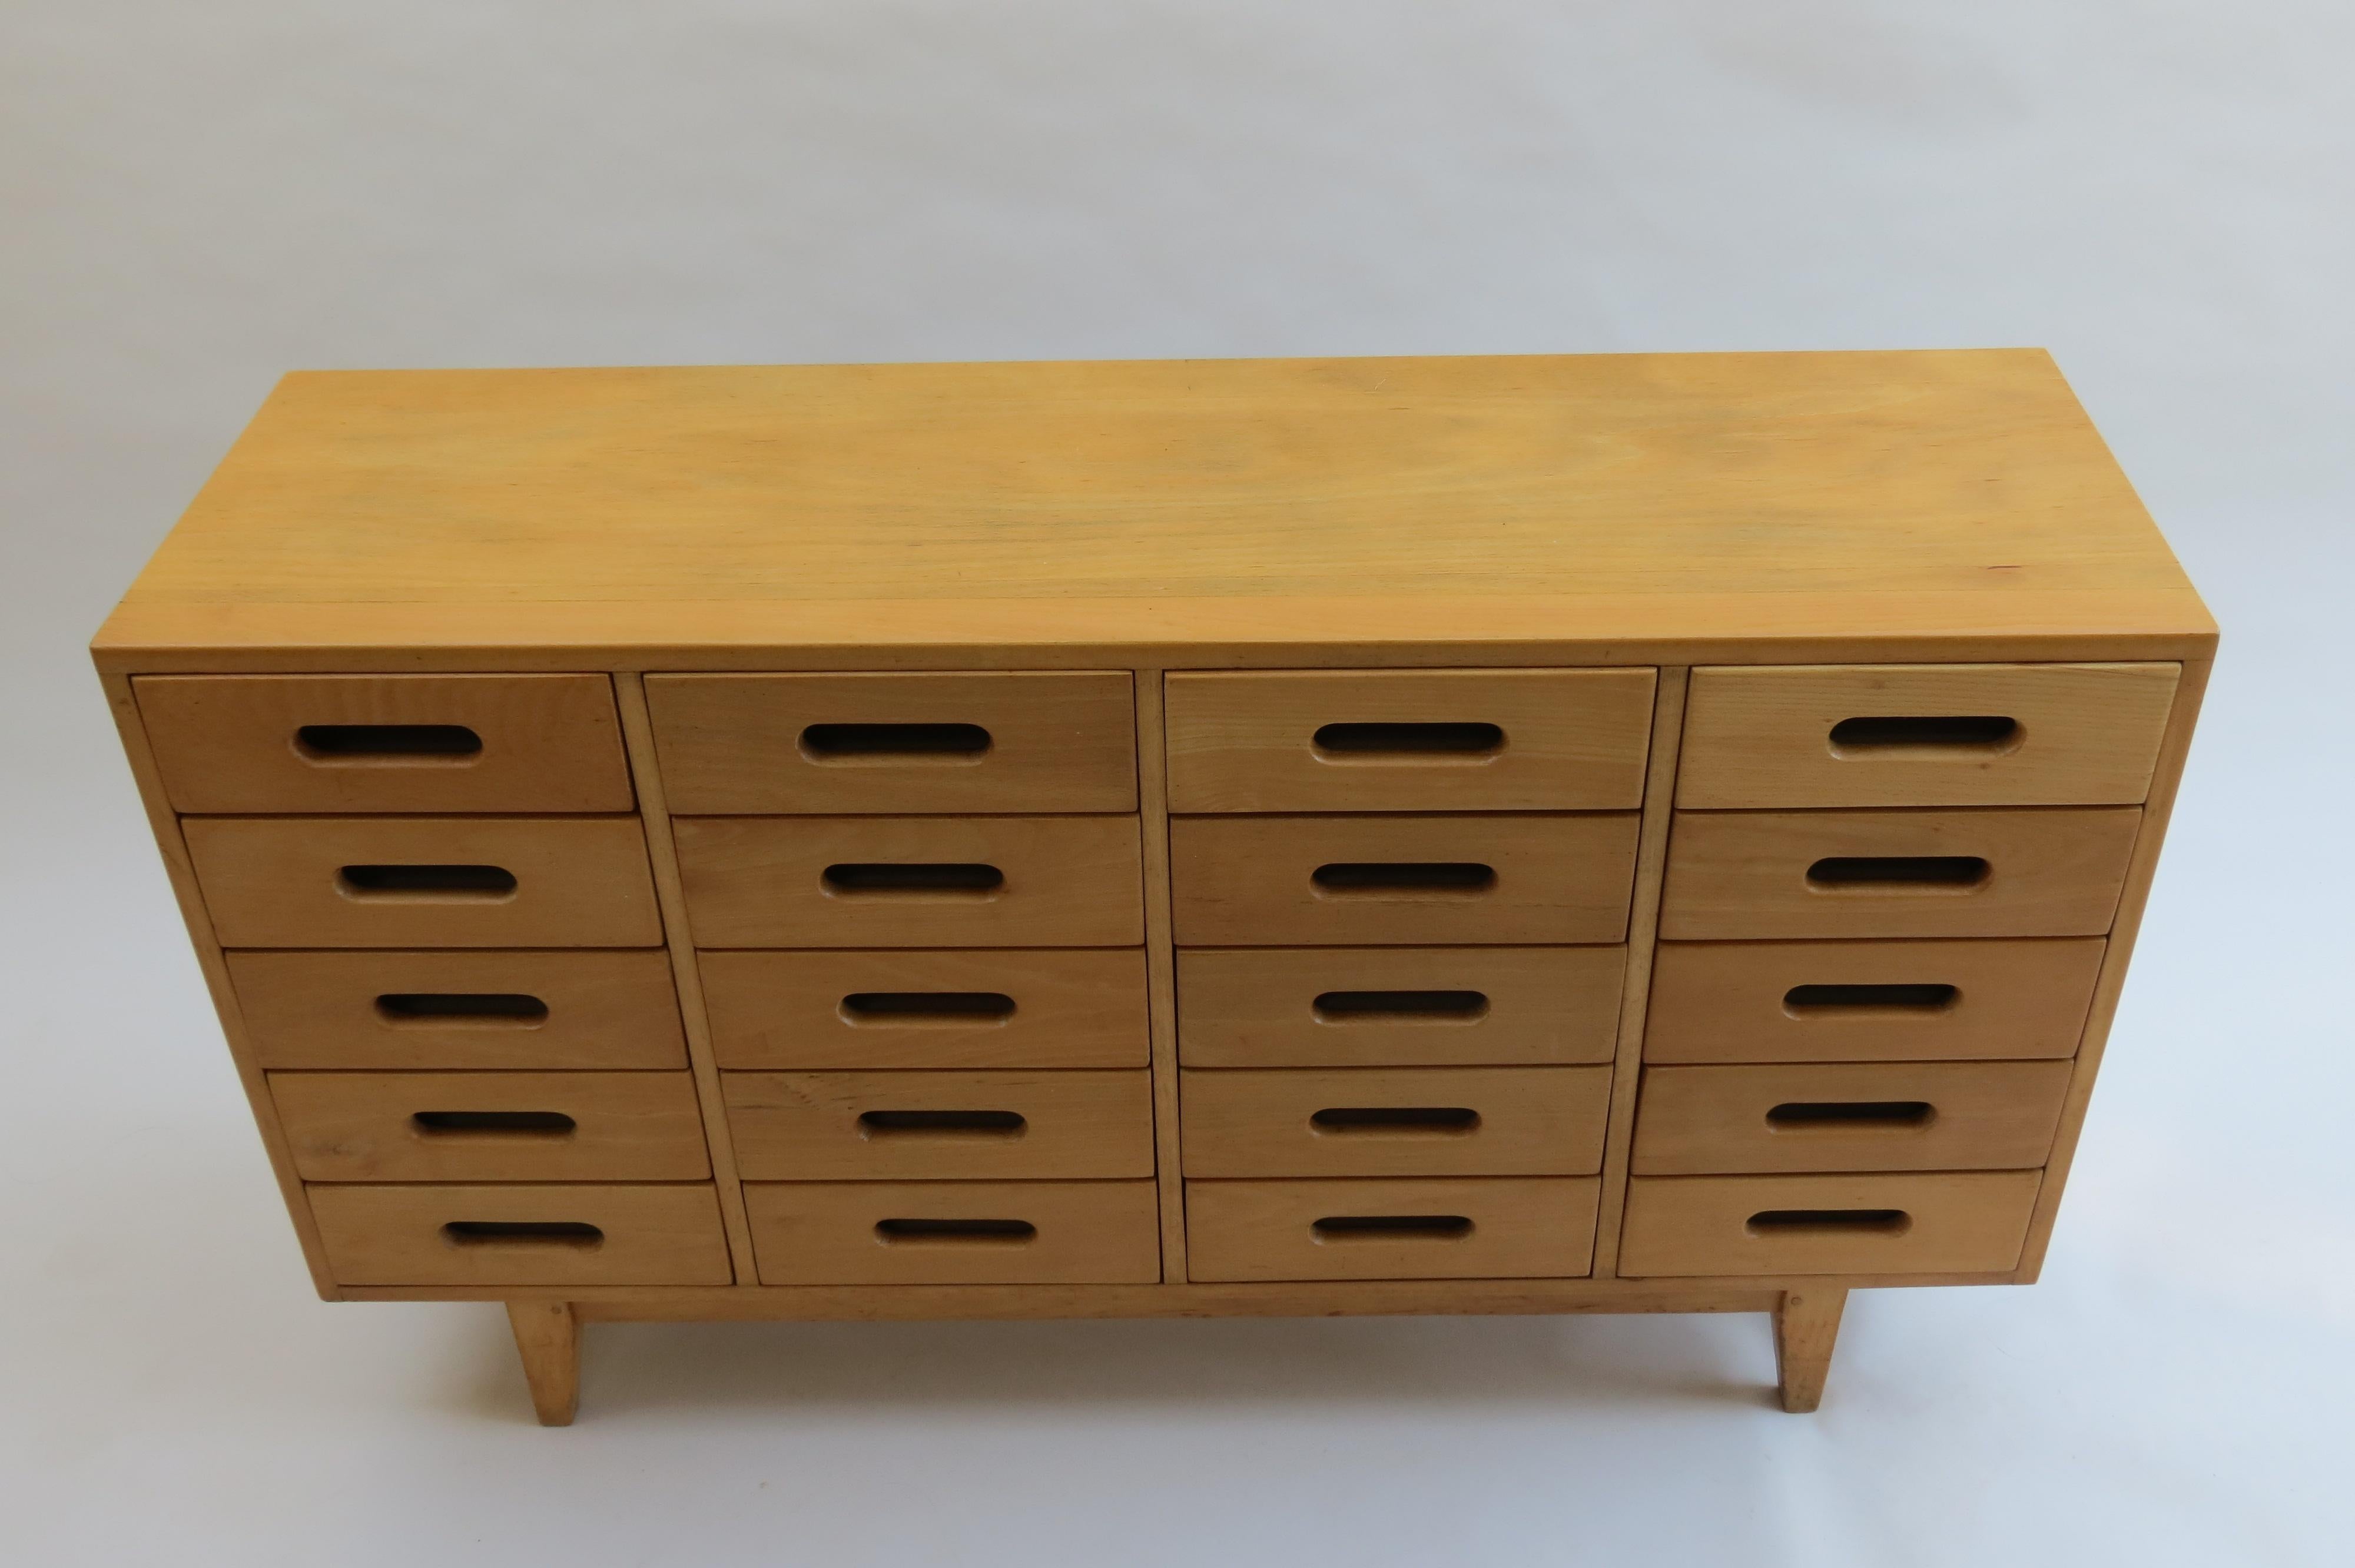 Chest of drawers dating from the 1950s designed by James Leonard and manufactured by Esavian, UK.

Solid Beech case with Beech drawer fronts and drawer linings.  In good overall condition, some distressing over all.

The case has been